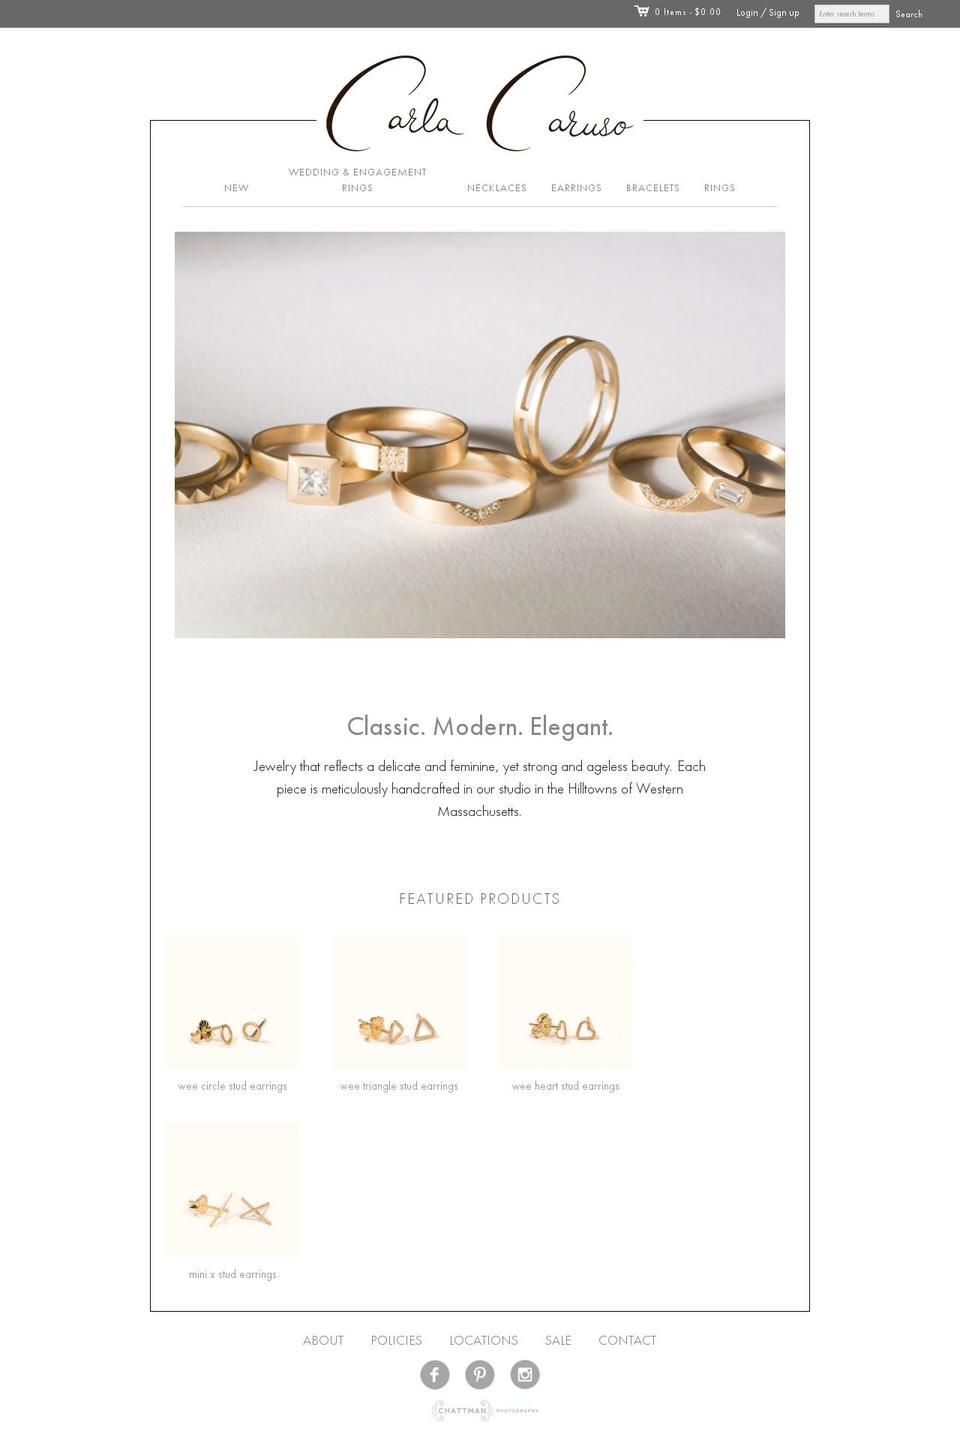 Editions Shopify theme site example carlacarusojewelry.com